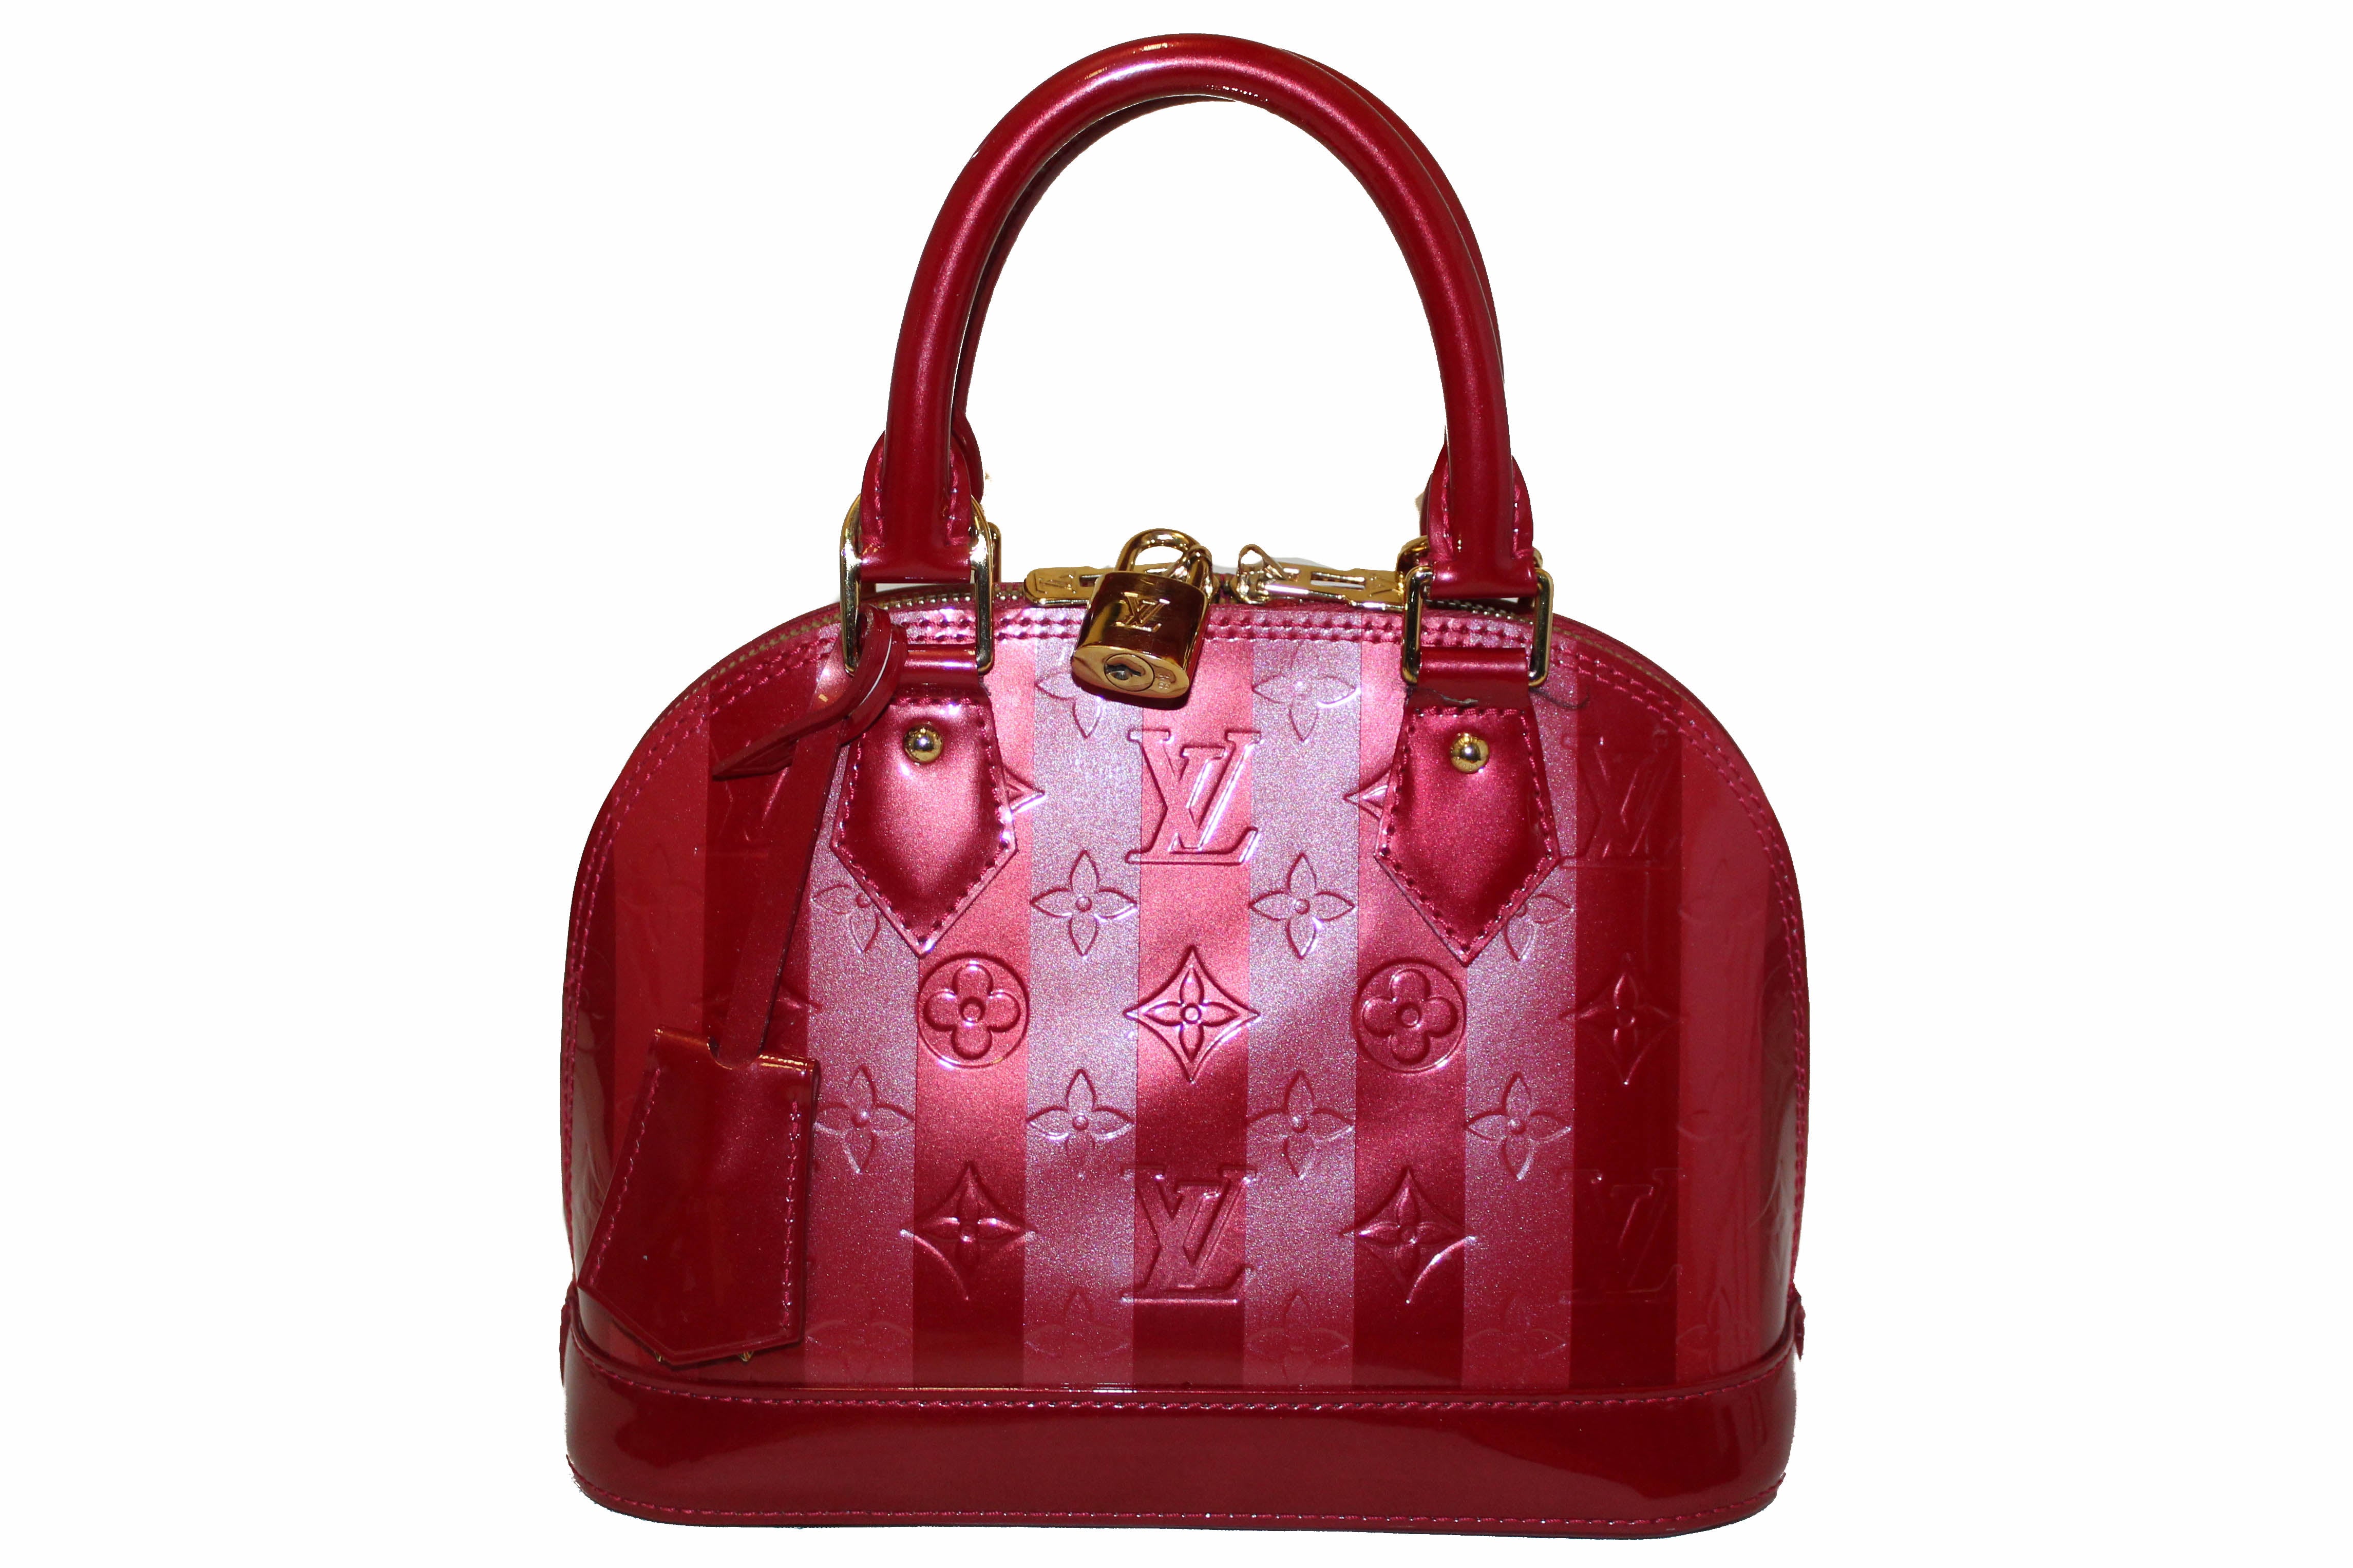 Louis Vuitton Alma BB in Pomme D'amour Vernis - SOLD